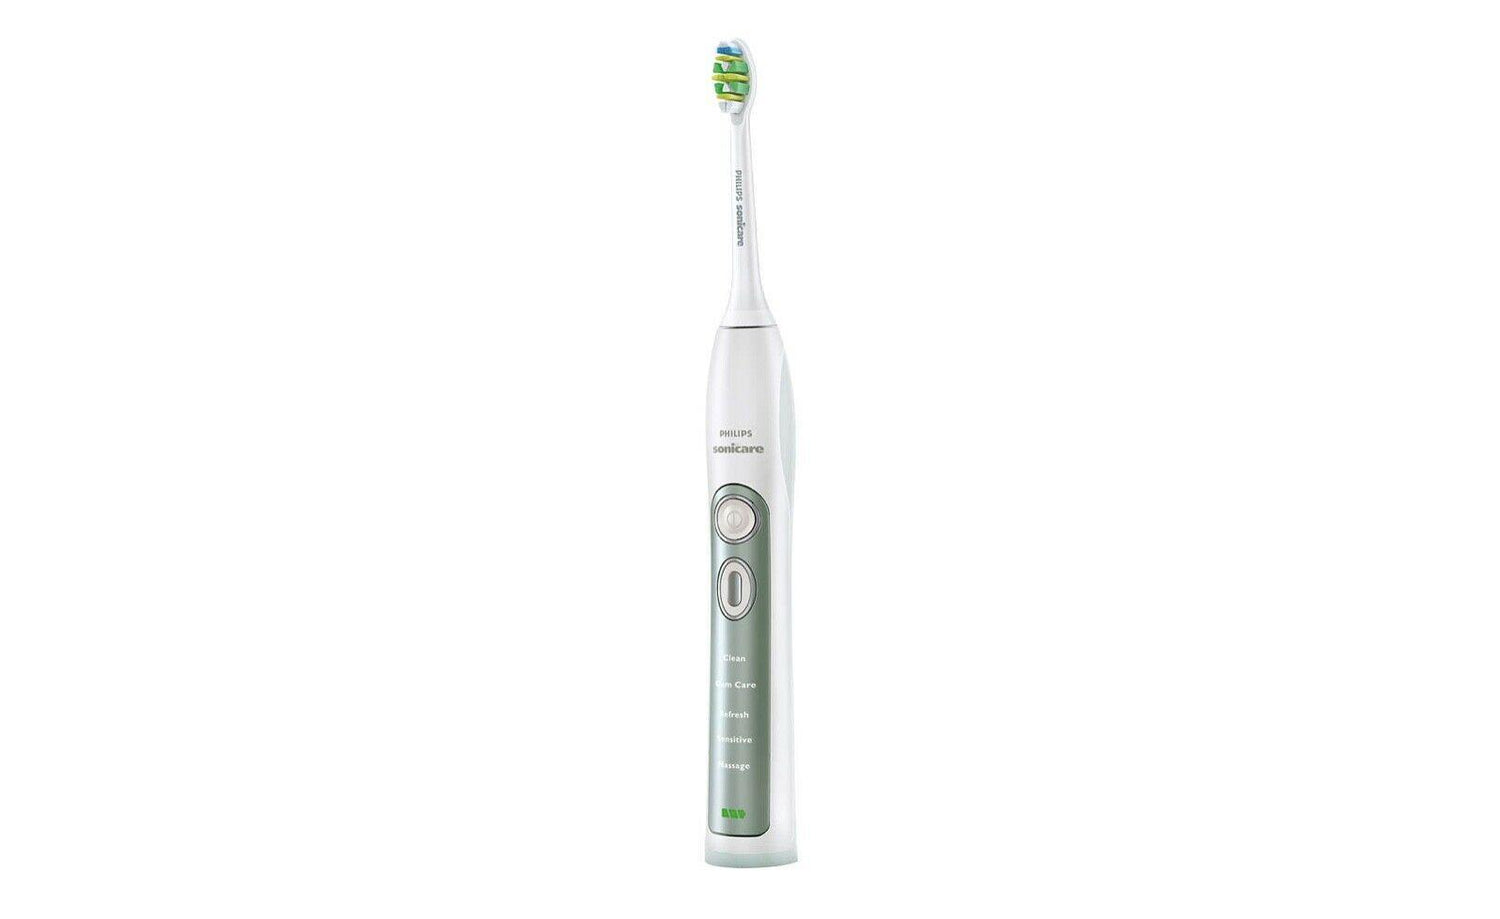 Philips Toothbrush Sonicare Hx6972 Flexcare Plus With Sanitiser